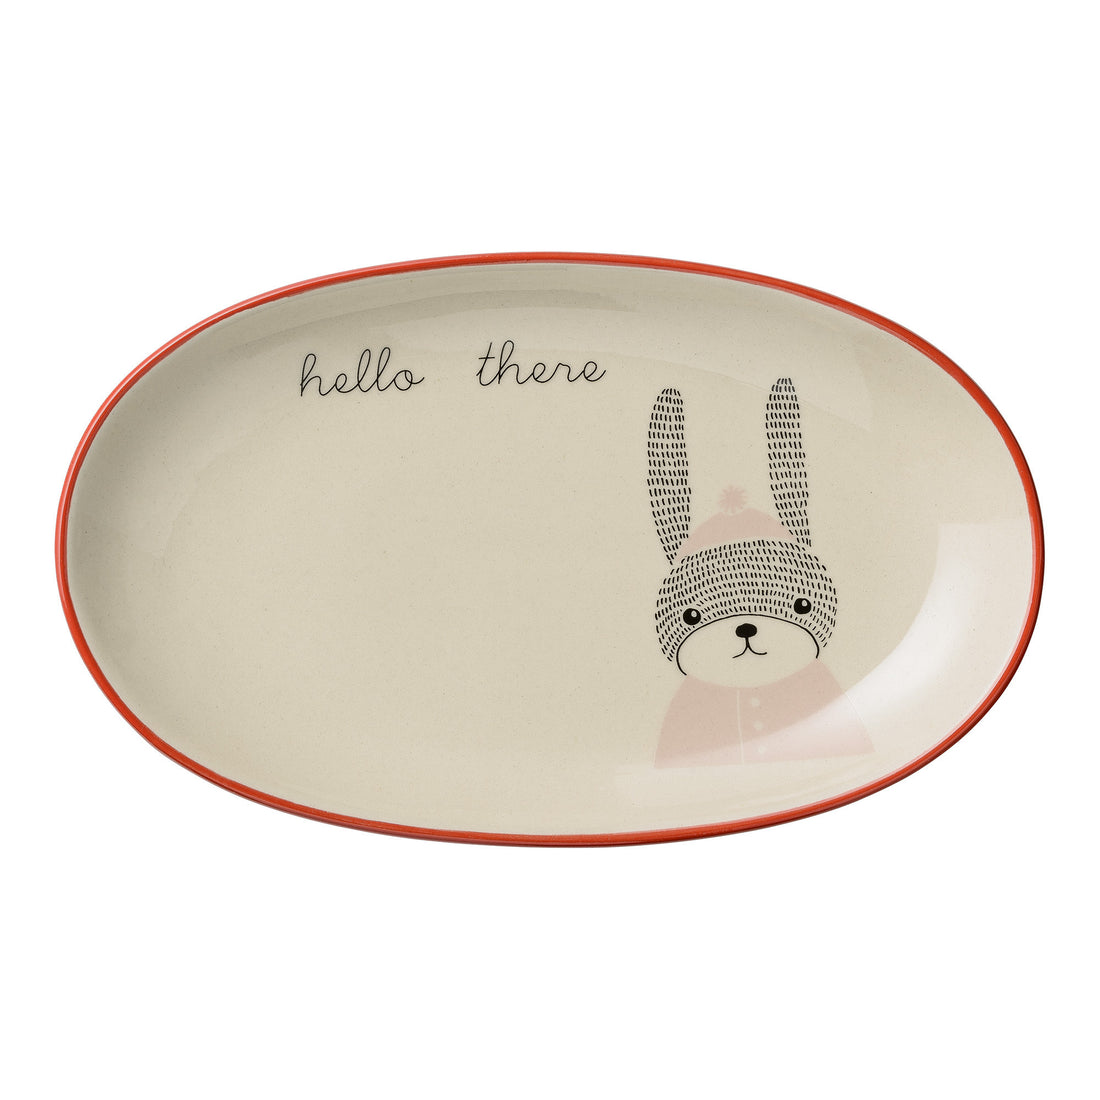 bloomingville-mollie-rabbit-offwhite-and-nude-ceramic-oval-plate-kitchen-bmv-21100629-01